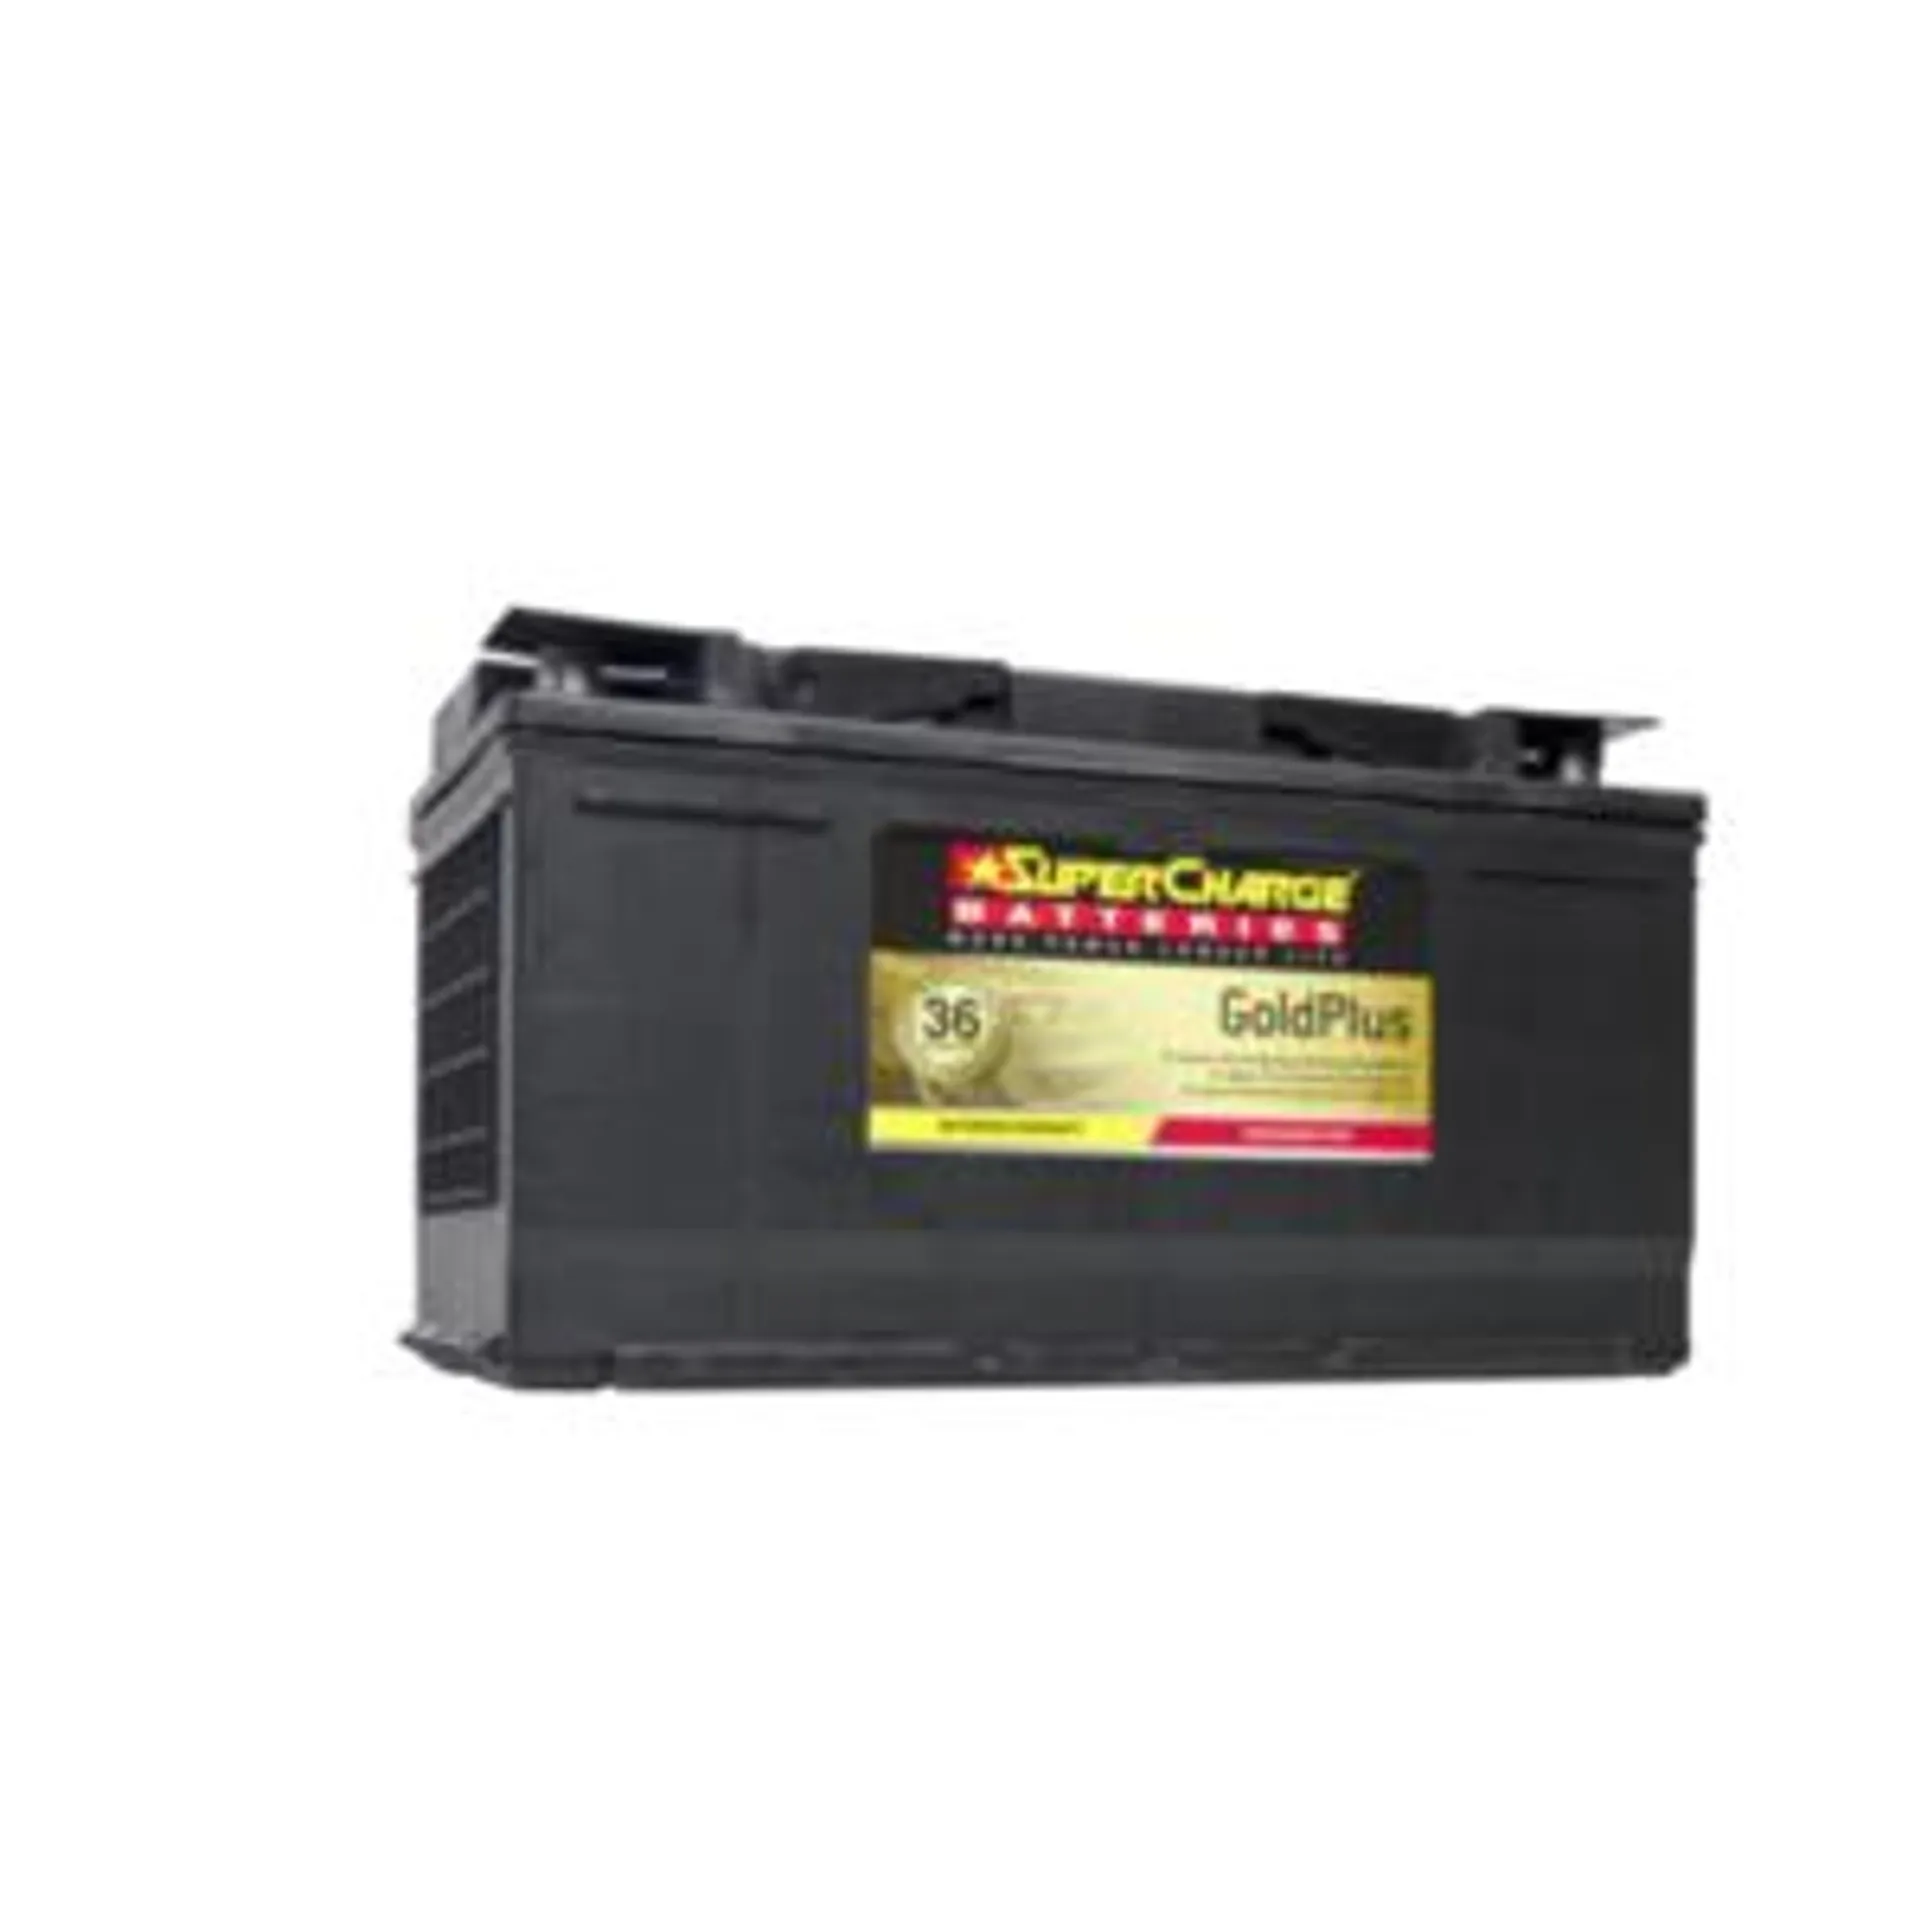 SuperCharge Gold Plus Car Battery - MF88H